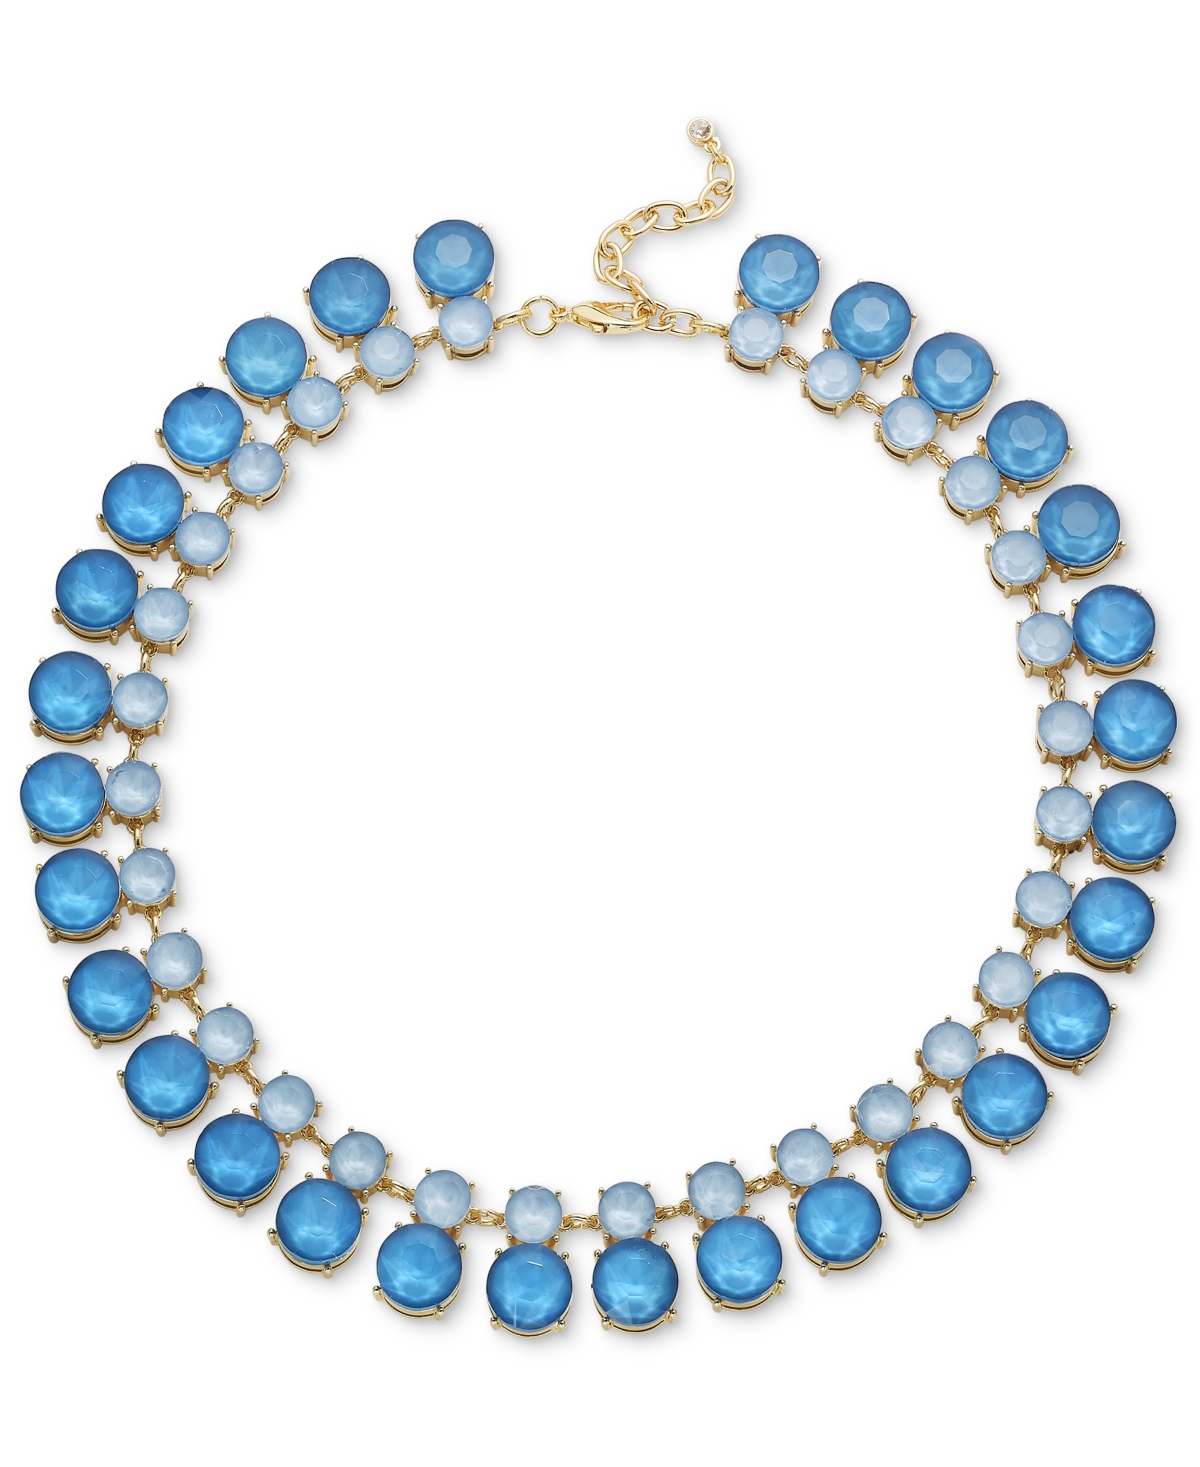 Gold-Tone Color Crystal & Stone All-Around Collar Necklace, 16" + 2" extender, Created for Macy's - Blue